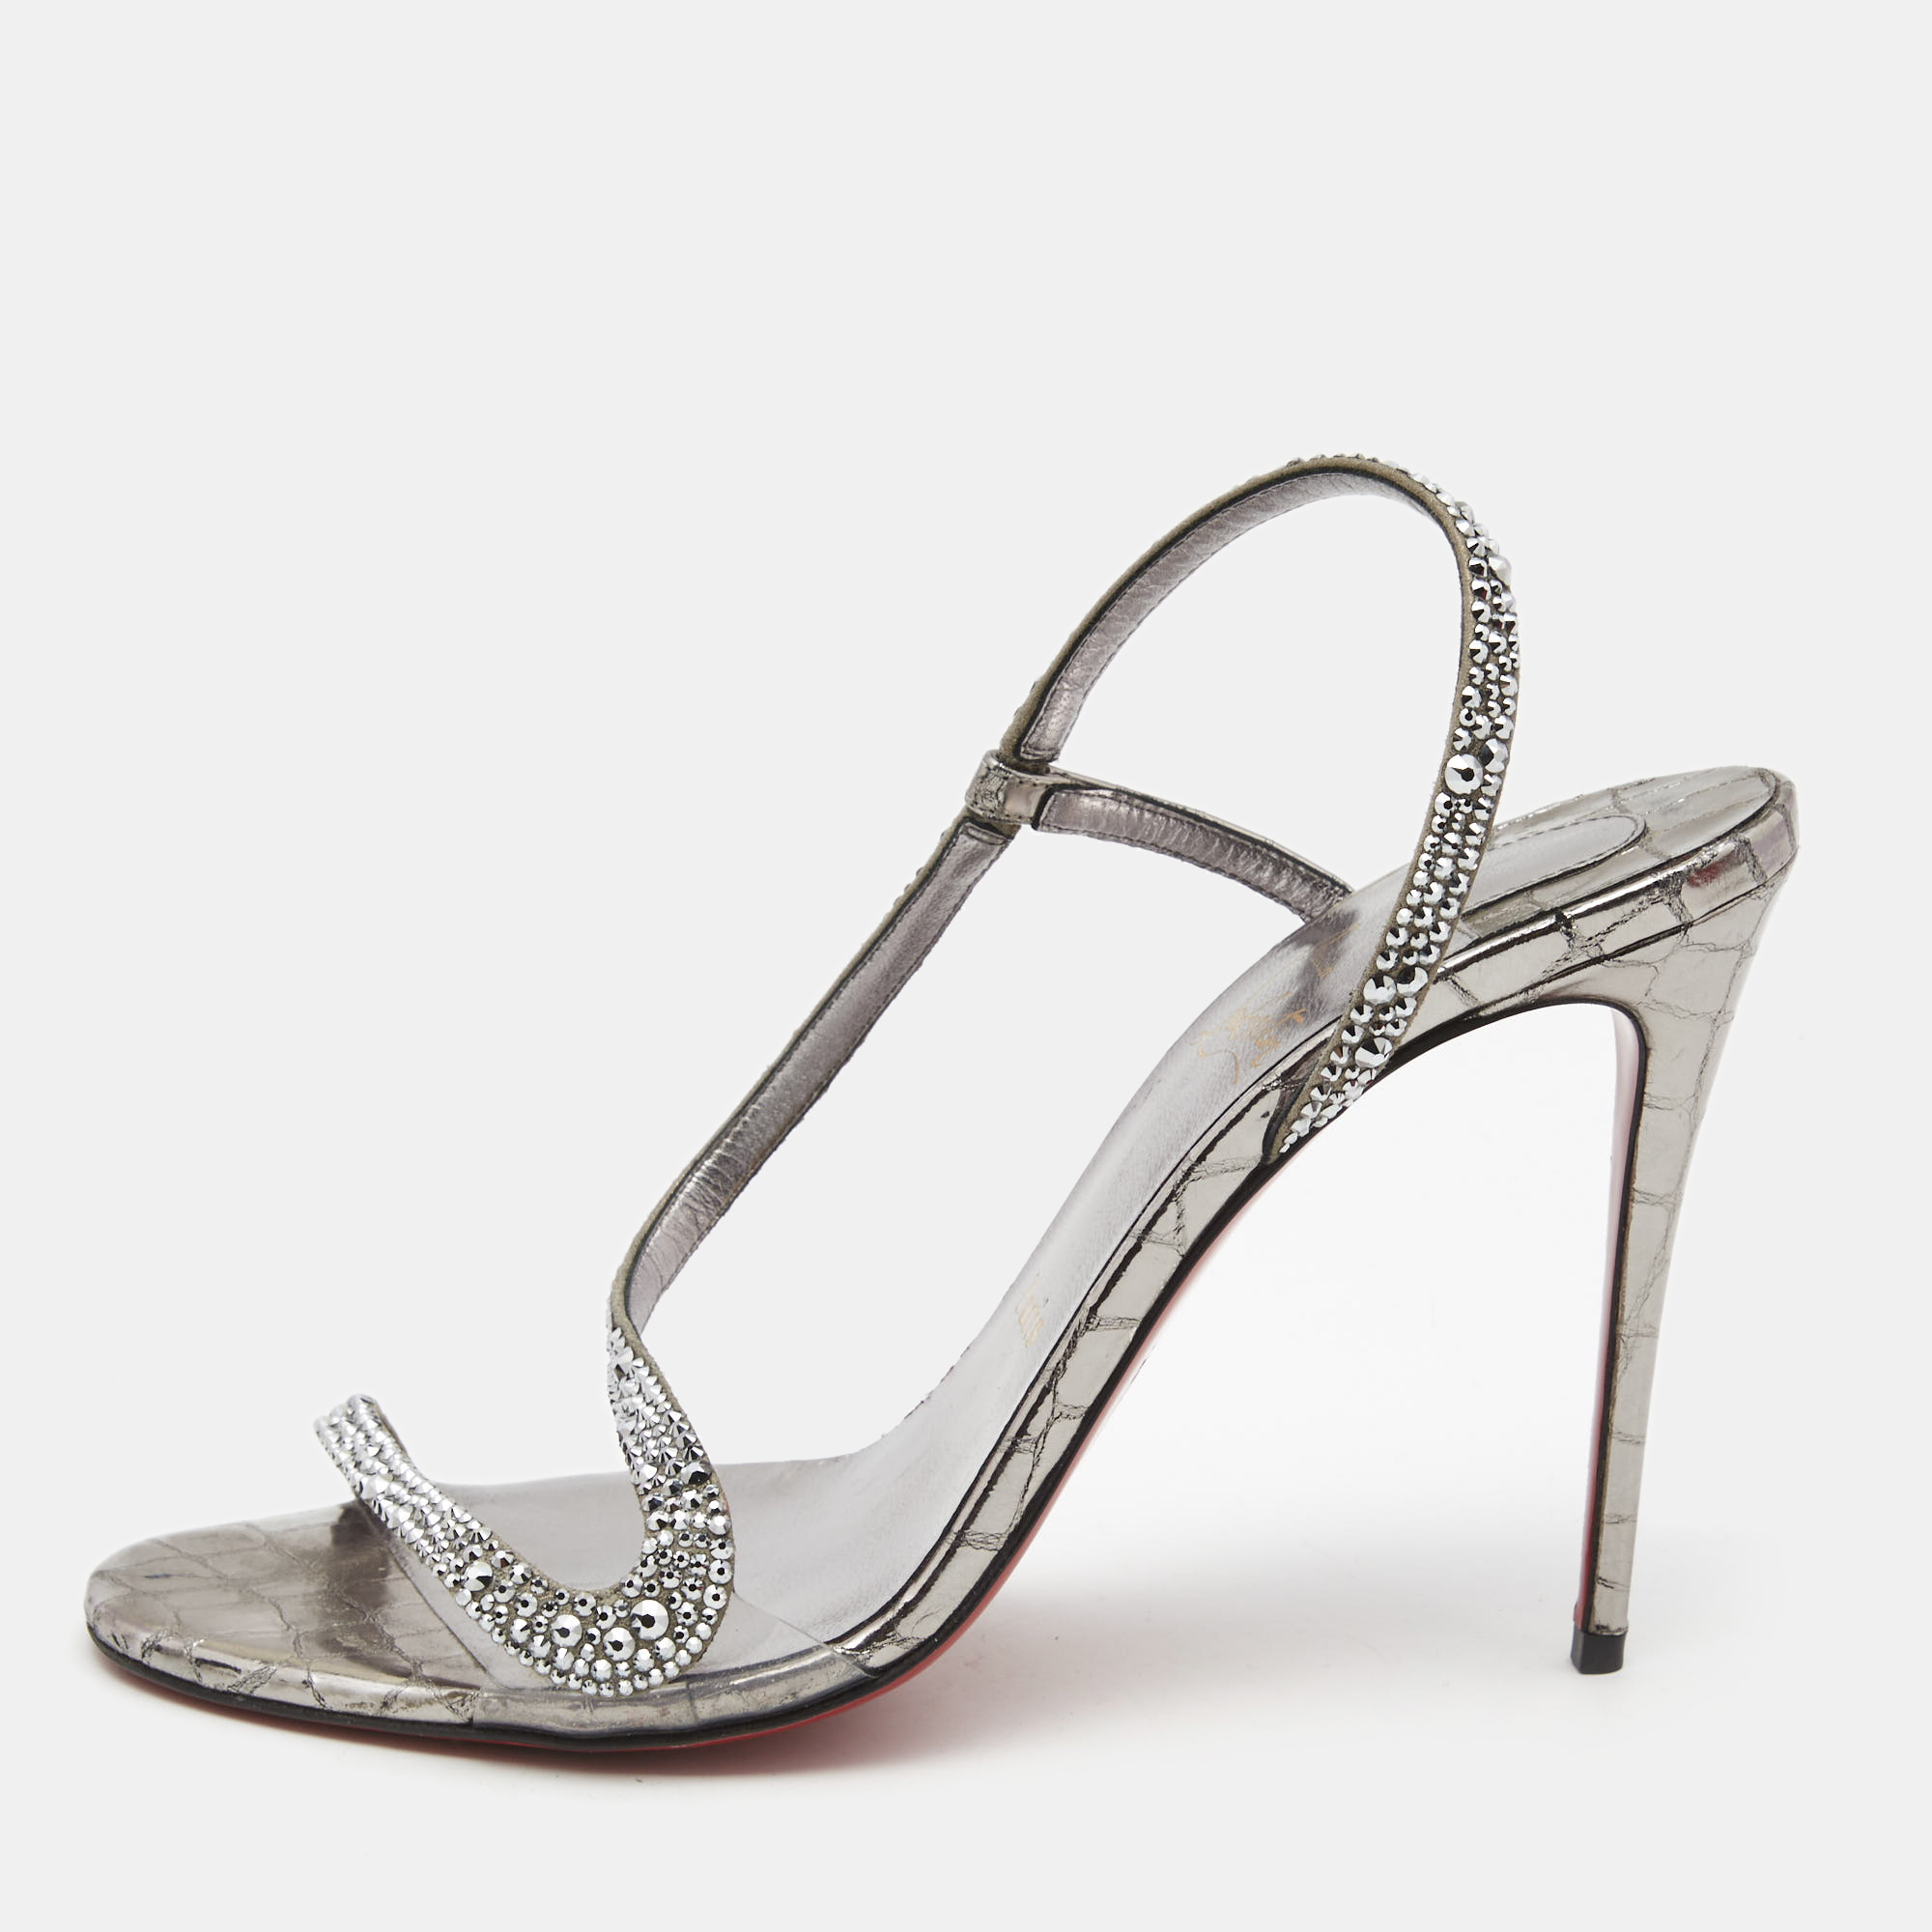 Pre-owned Christian Louboutin Metallic Grey Crystal Embellished Suede Rosalie Sandals Size 39.5